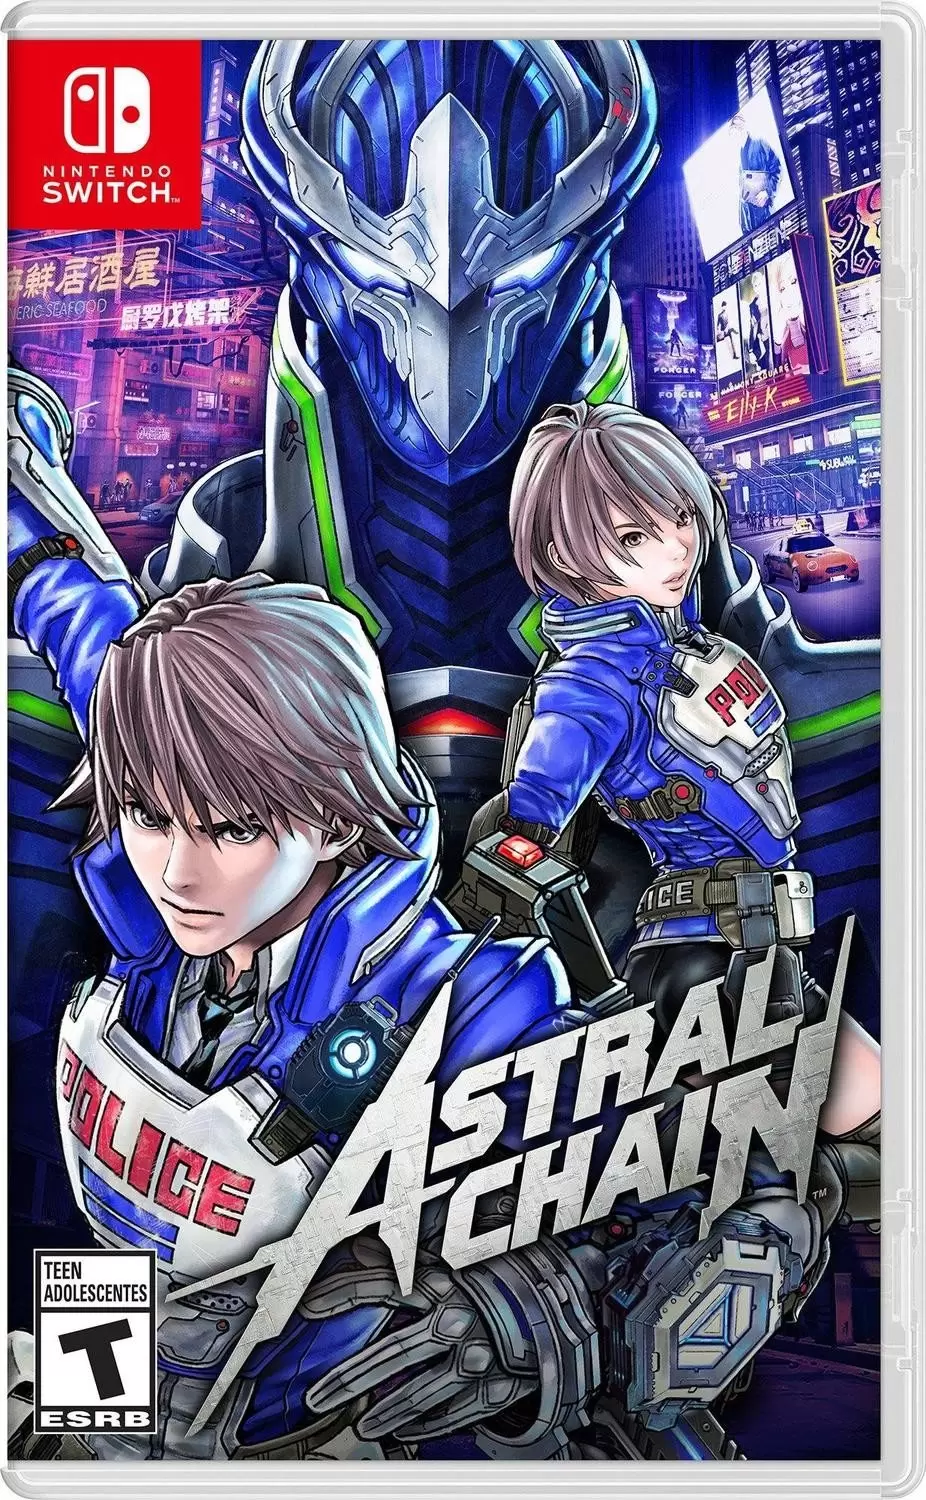 Nintendo Switch Games - Astral Chain